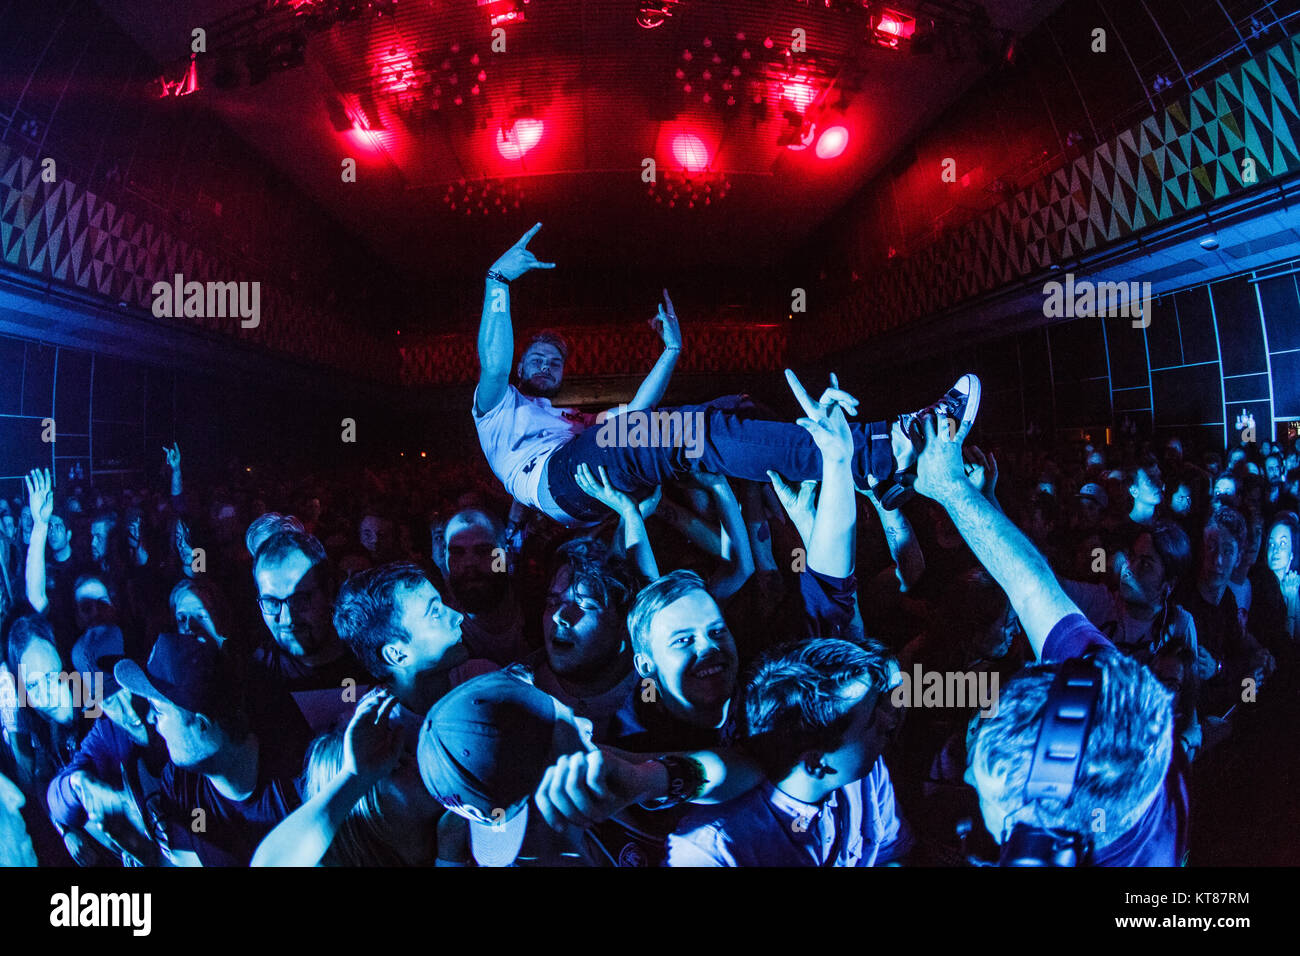 A concert goer is crowd surfing at a live concert with the British metalcore band Architects performs at VEGA in Copenhagen. Denmark, 28/01 2016. Stock Photo